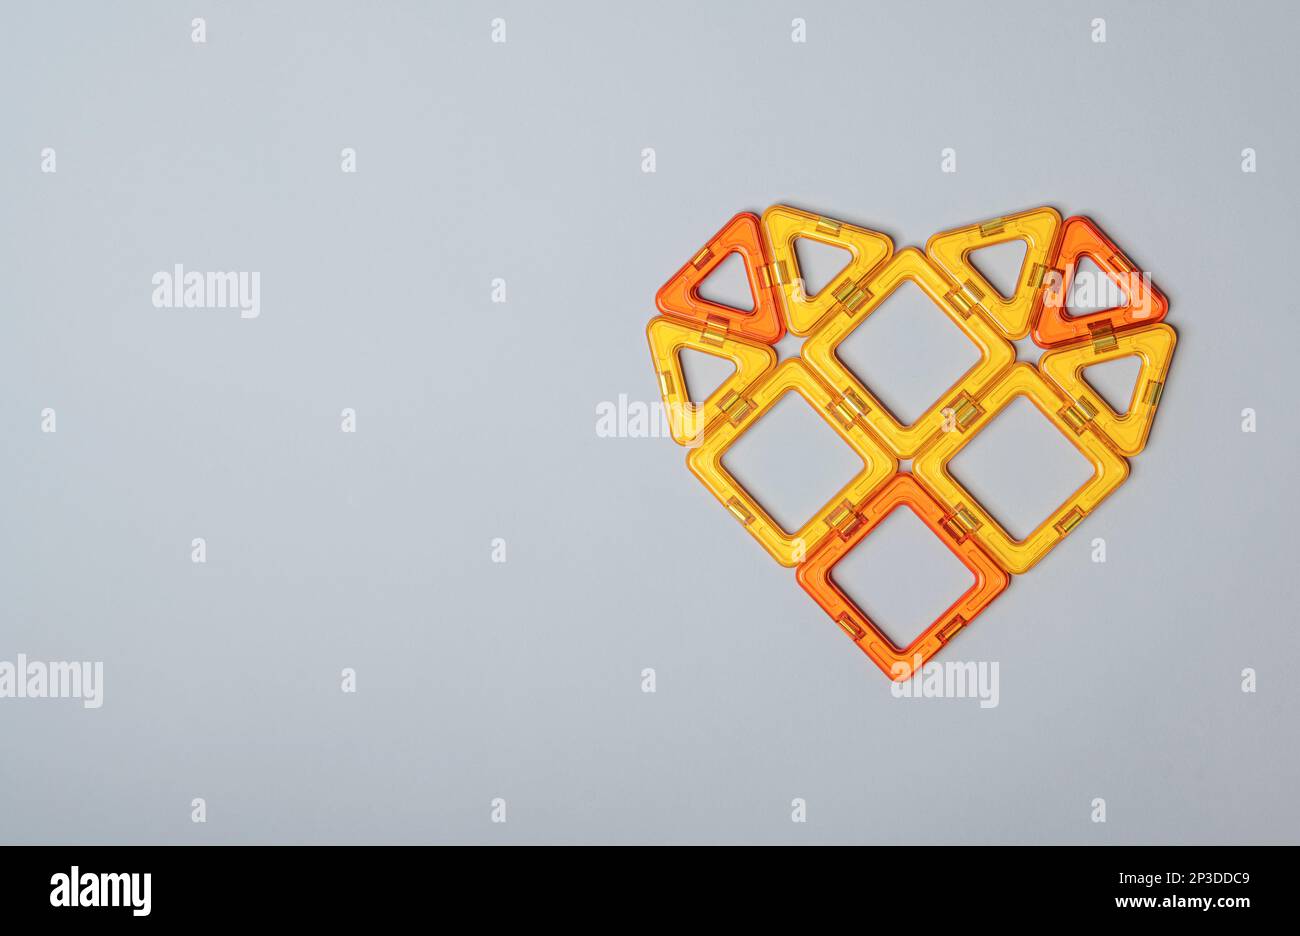 The figure of the heart from the details of the magnetic designer. Stock Photo